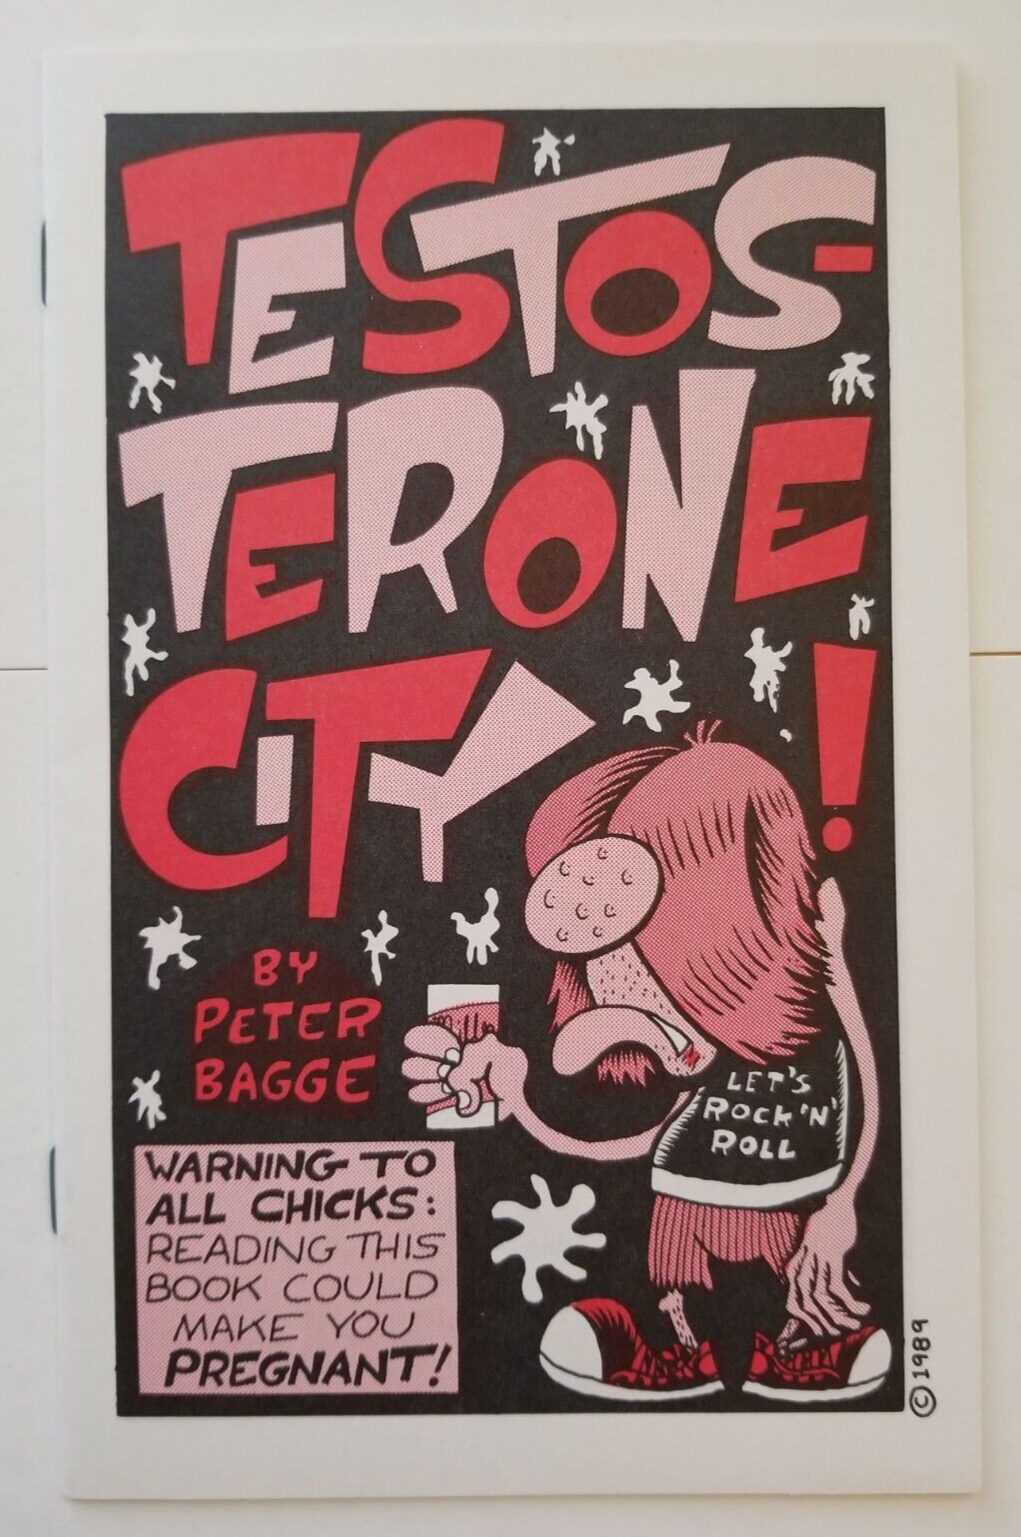 Testosterone City #1 by Peter Bagge ashcan (1994, Starhead Comix) HTF / Rare